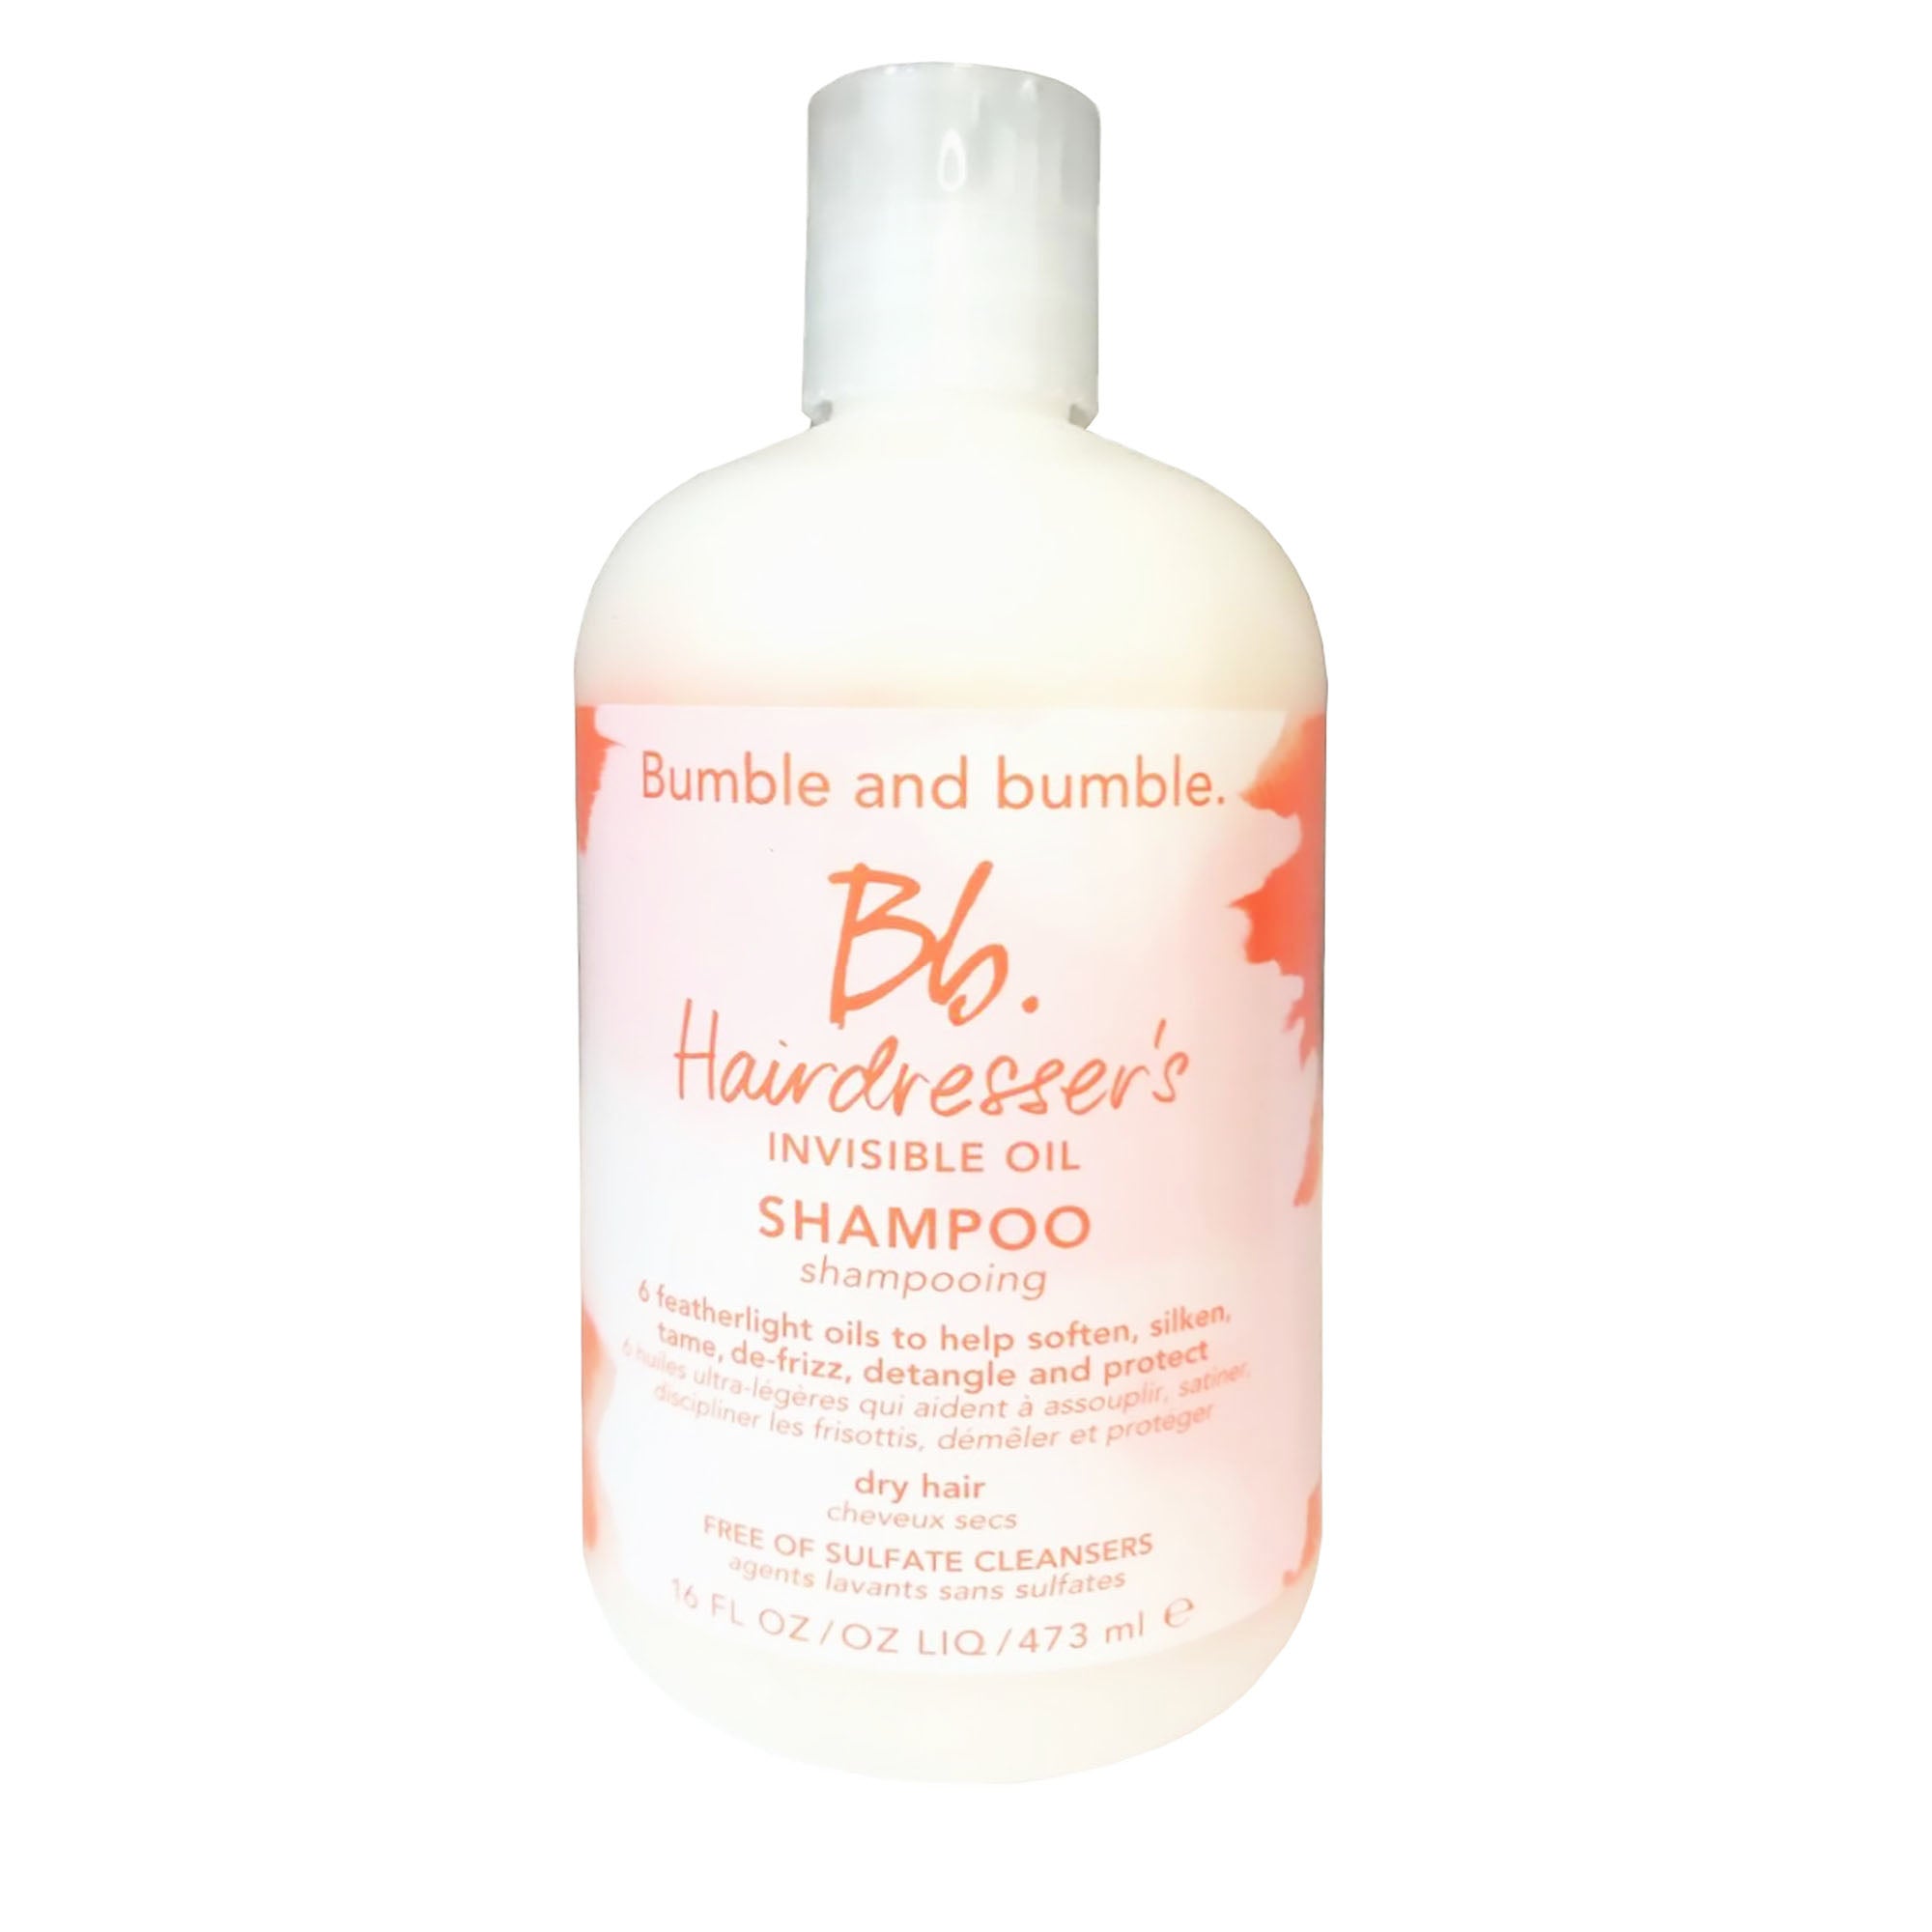 Bumble and Bumble Hairdresser's Invisible Oil Shampoo Jumbette - 16oz / 16 OZ